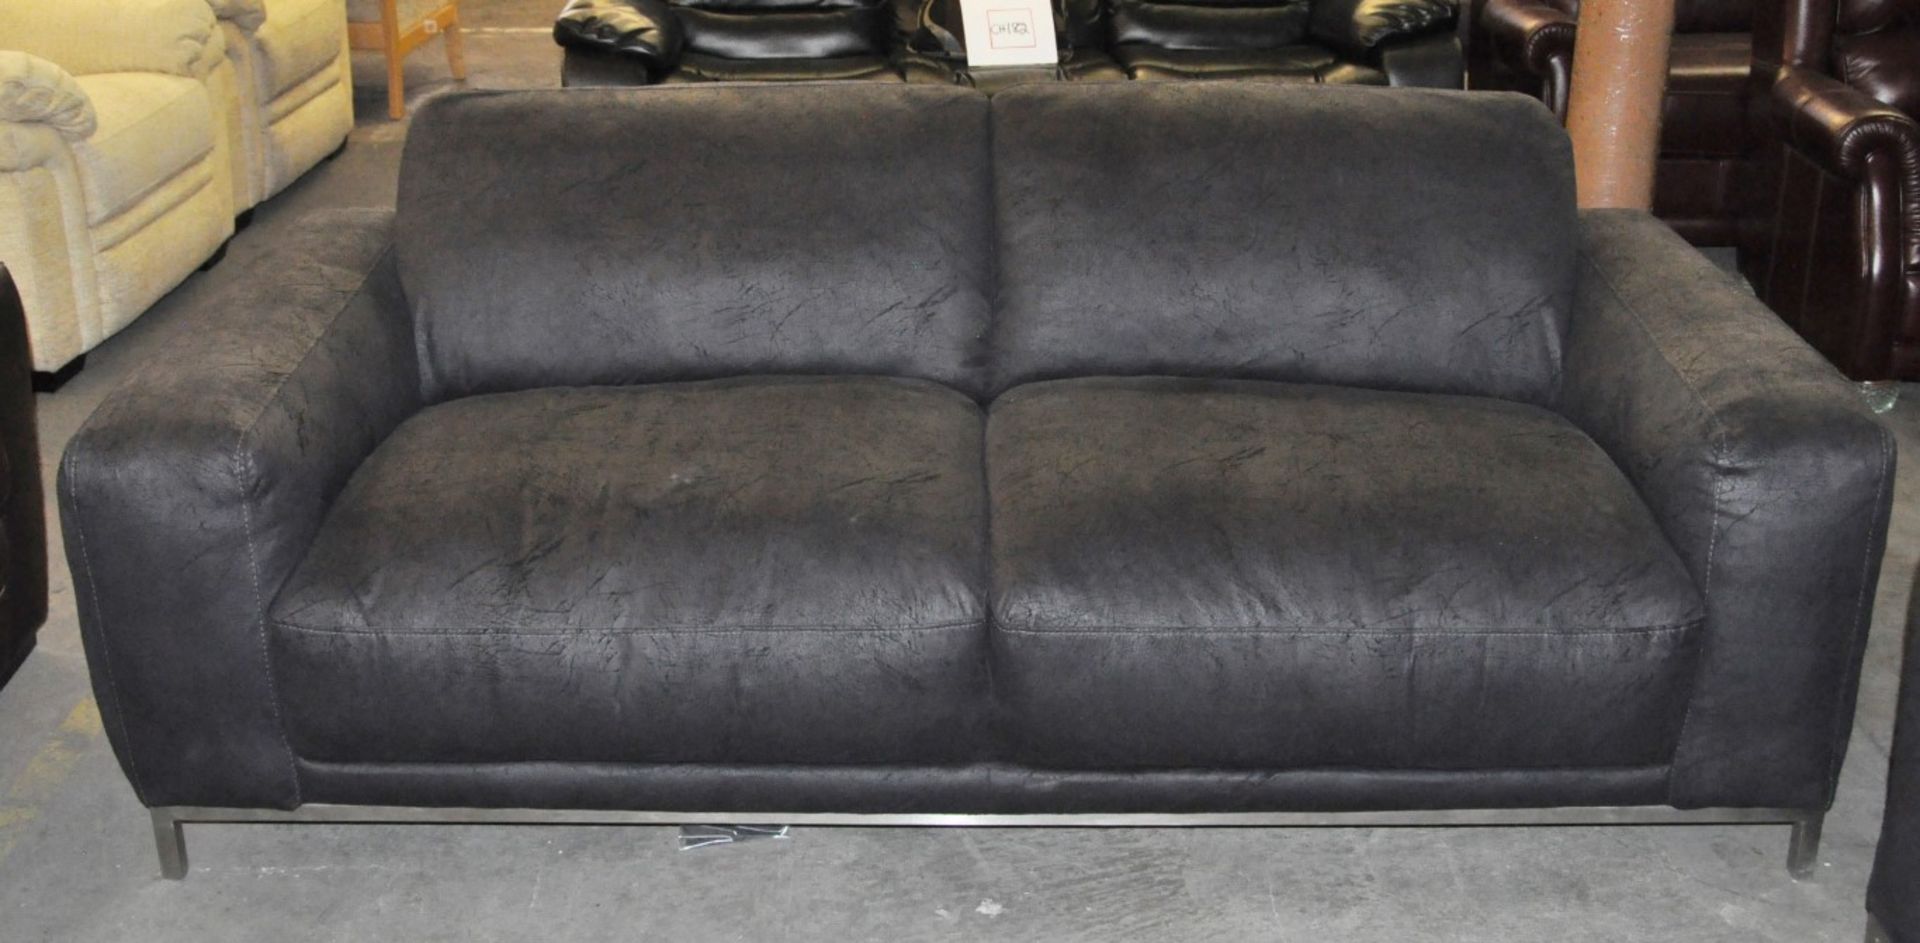 1 x 'Valletta' 3 & 2 Seater Sofa in a Black Crackle Fabric – Ex Display - Dimensions (2 Seater) - Image 4 of 6